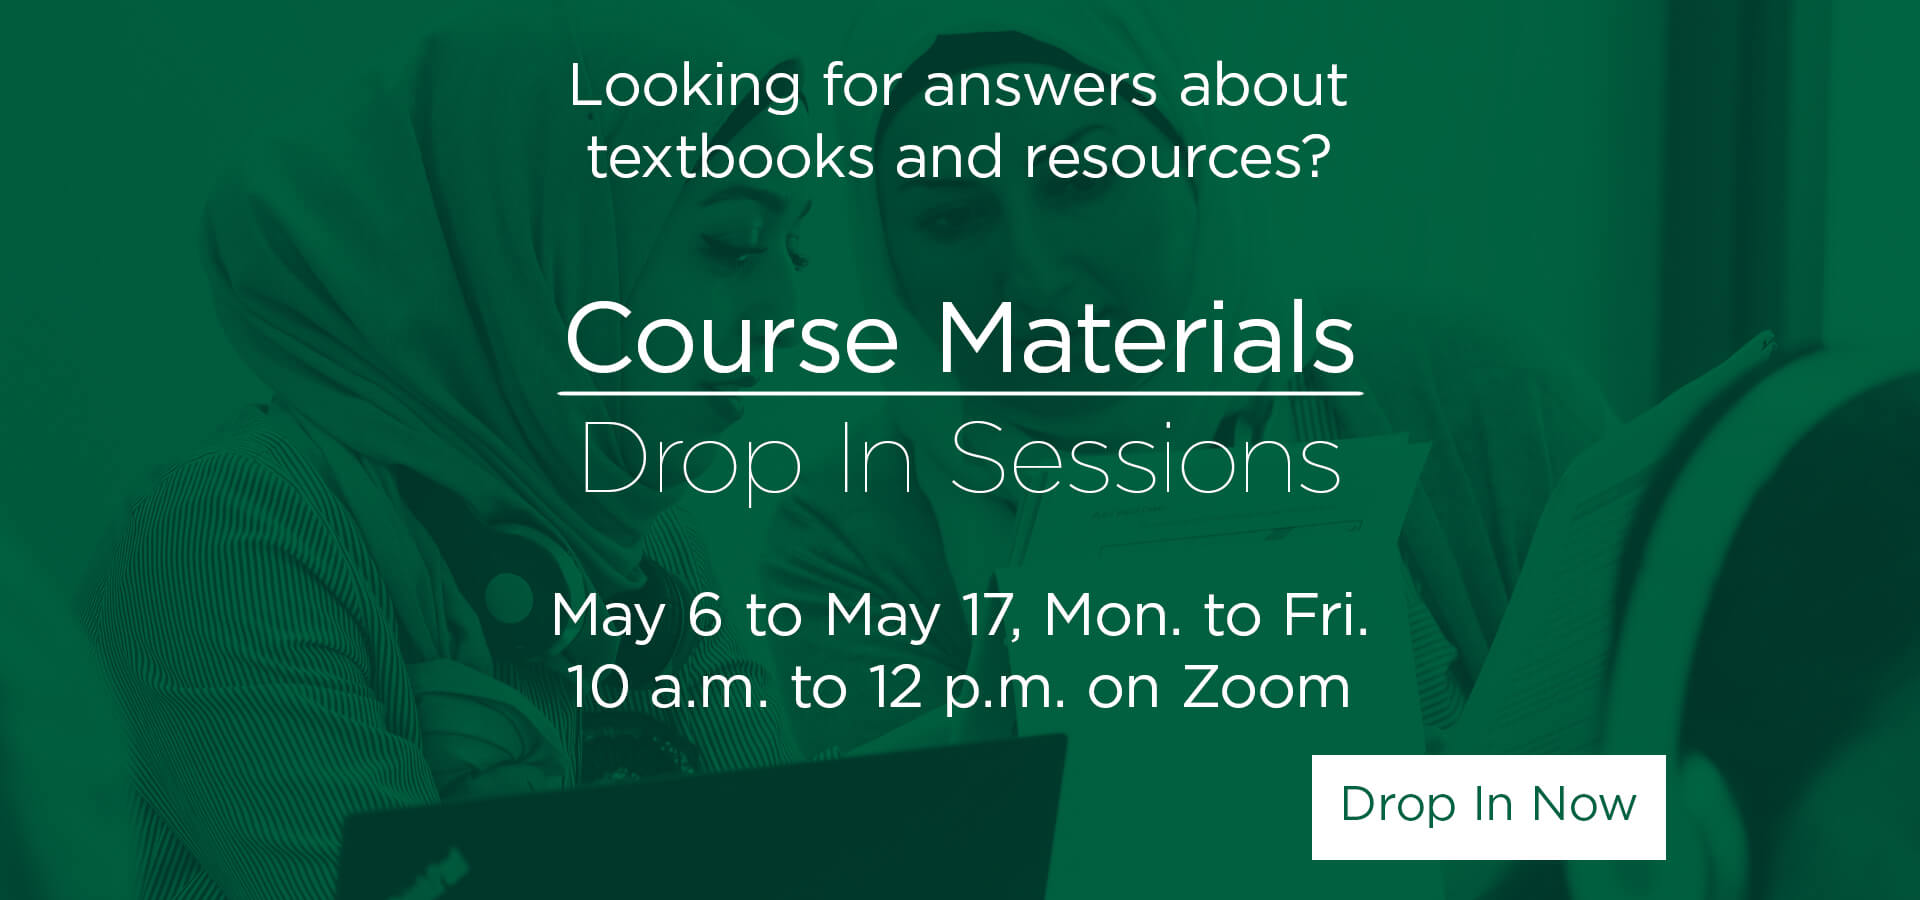 Looking for answers about textbooks and resources? Course Materials Drop-in Sessions. May 6 to May 17, Mon. to Fri. 10 a.m. to 12 p.m. on Zoom. Drop In Now ->